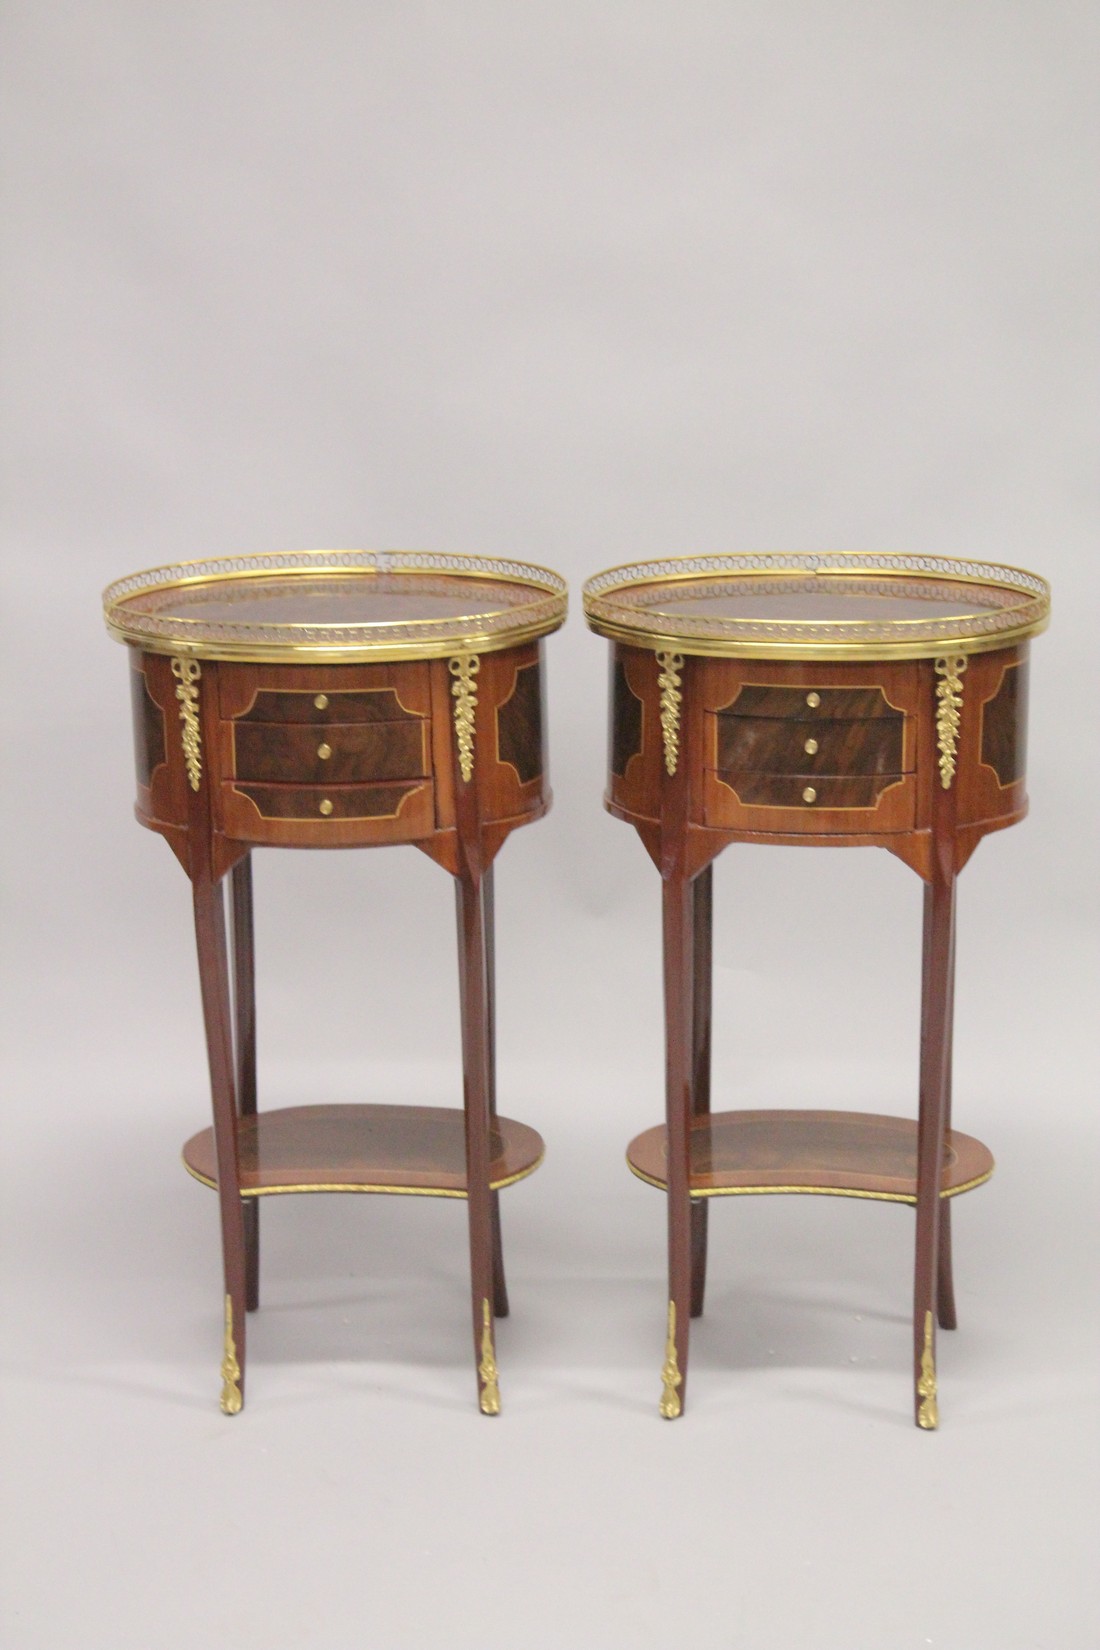 A PAIR OF LOUIS XVITH DESIGN INLAID OVAL BEDSIDE CUPBOARDS with three drawers, under tier and